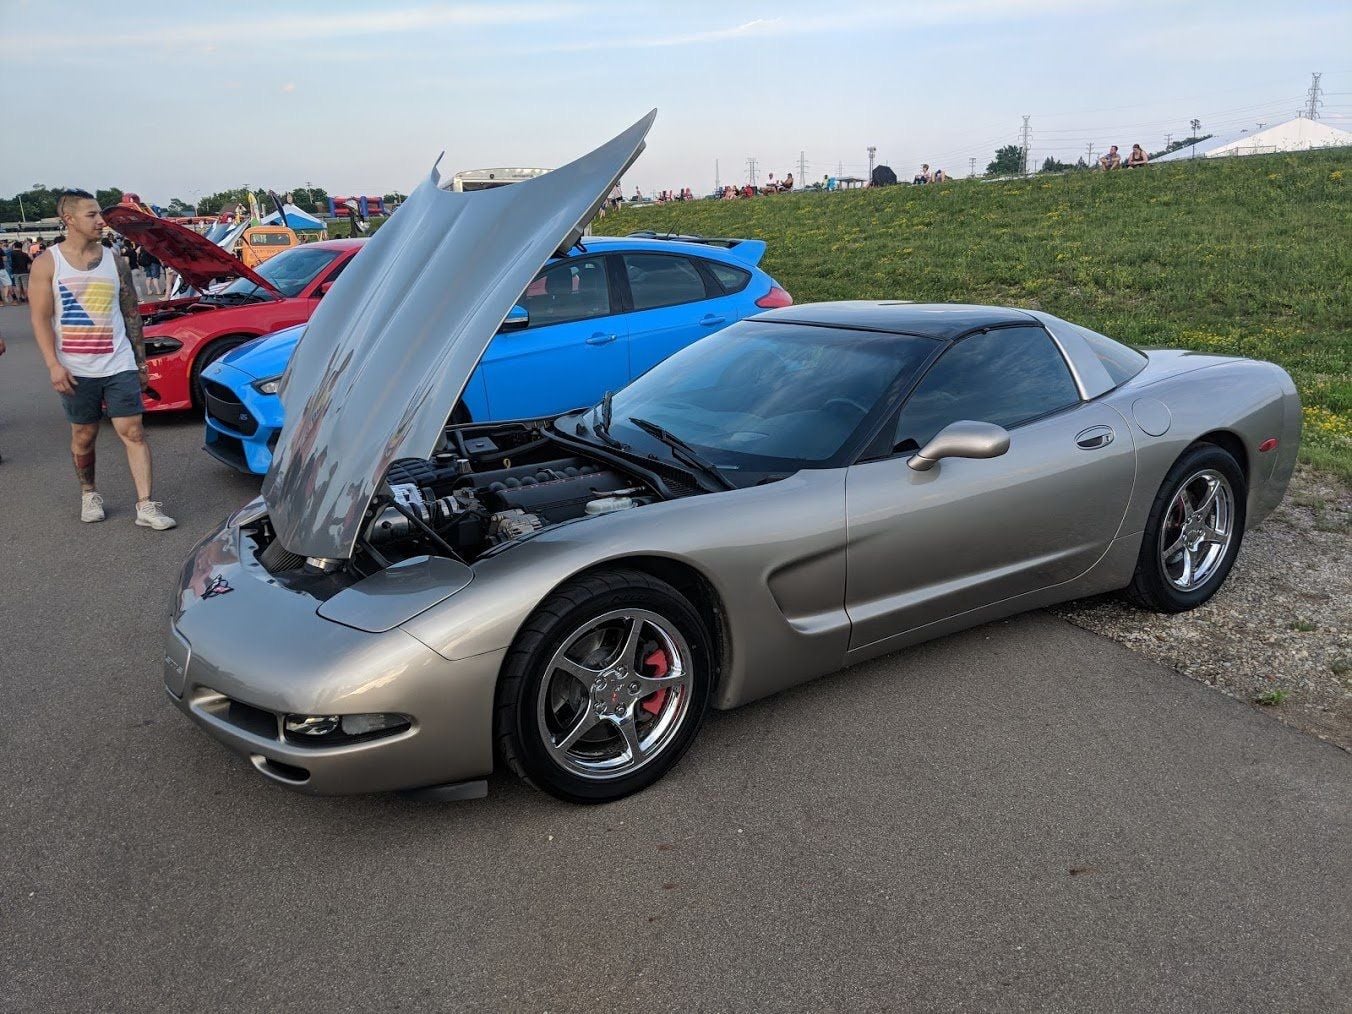 1999 Chevrolet Corvette - 99 c5 z51 - Used - VIN 1g1yy22g8x5124878 - 103,000 Miles - 8 cyl - 2WD - Automatic - Coupe - Gray - Westland, MI 48187, United States